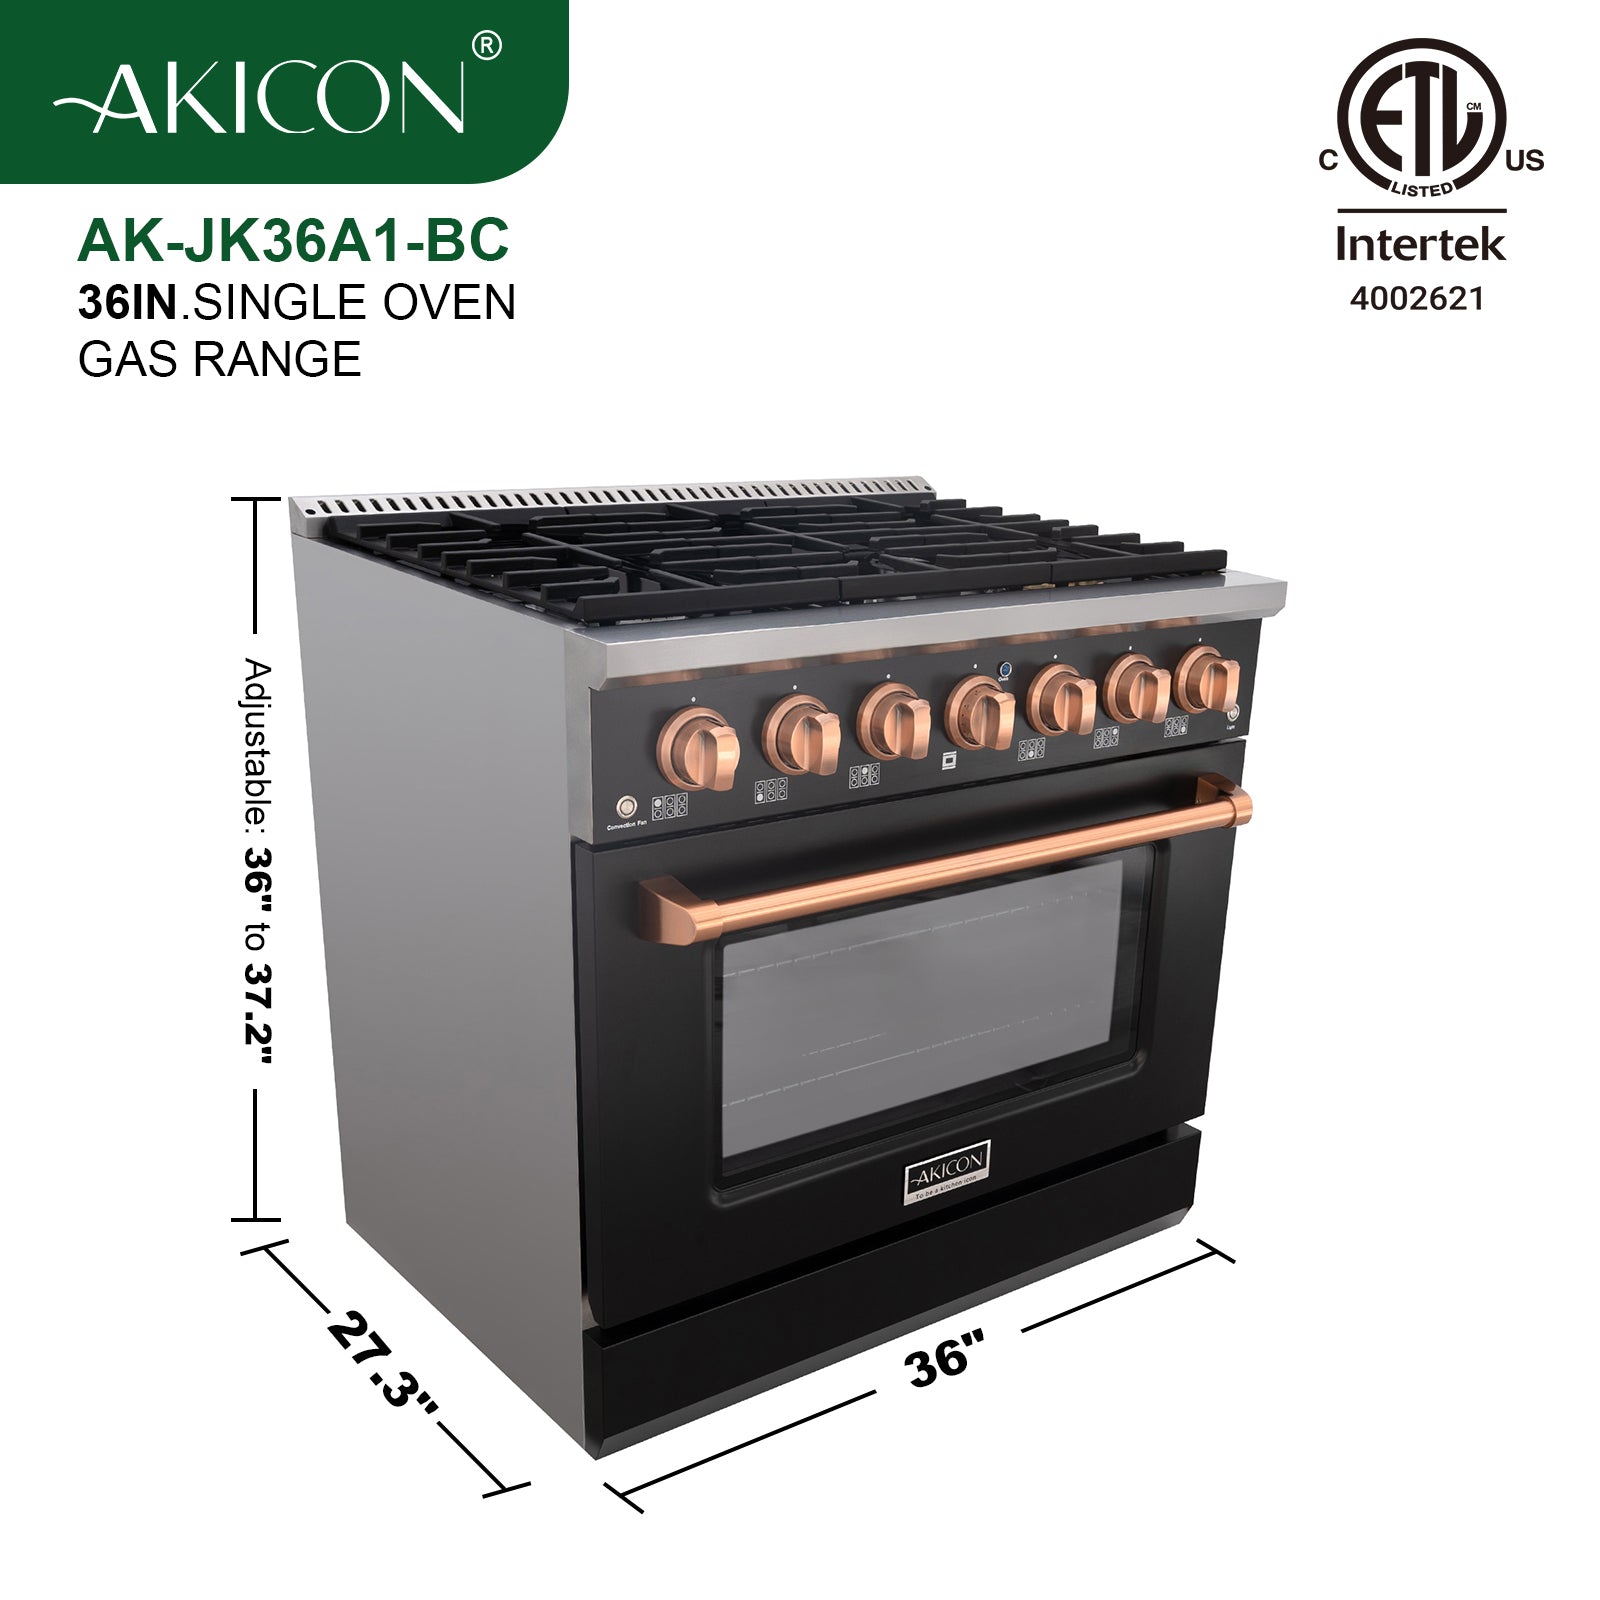 Akicon 36" Slide-in Freestanding Professional Style Gas Range with 5.2 Cu. Ft. Oven, 6 Burners, Convection Fan, Cast Iron Grates. Black & Copper